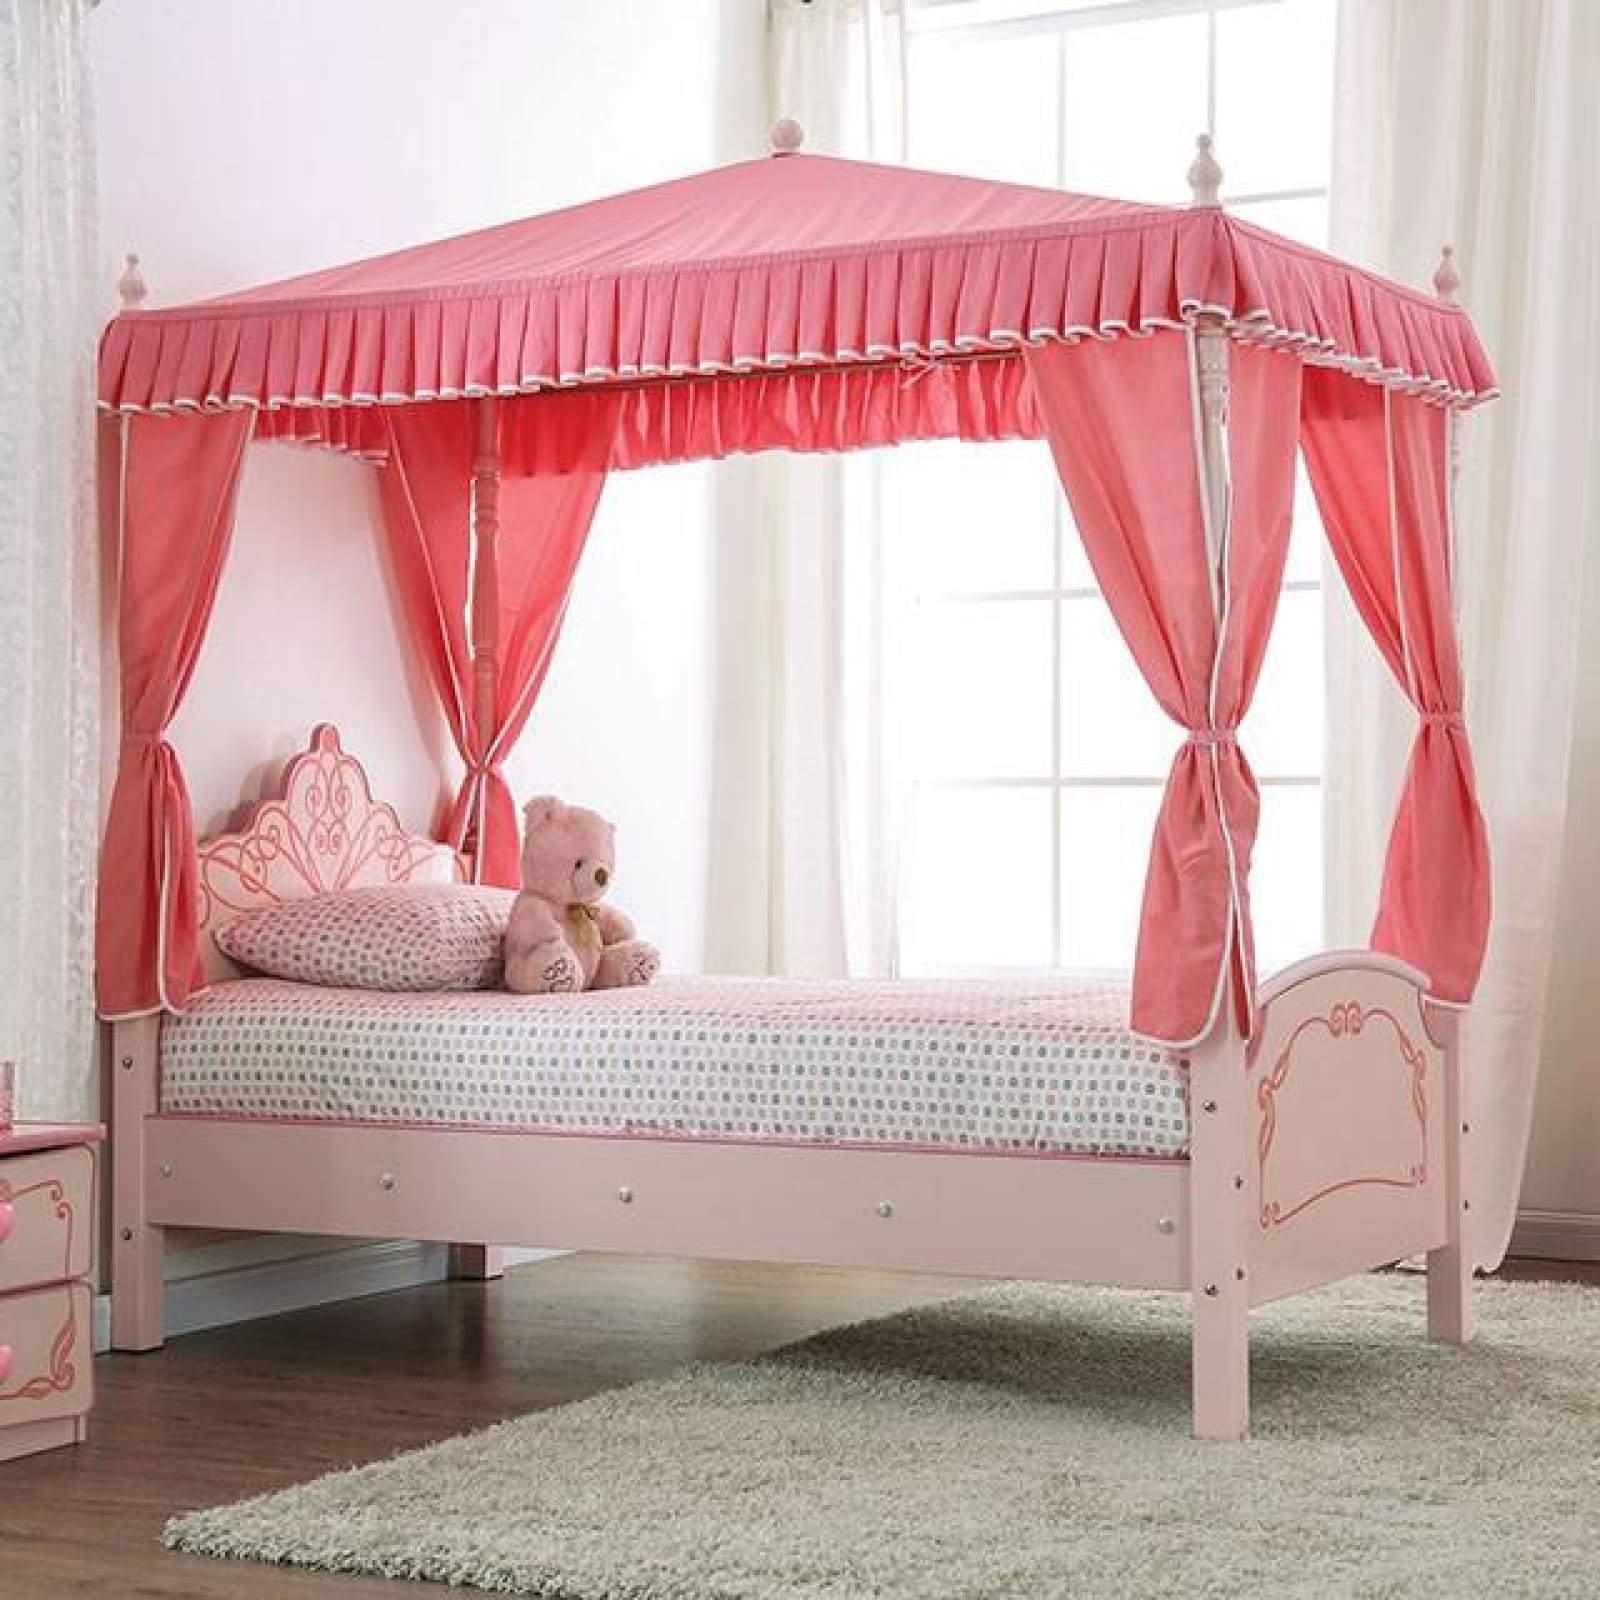 Fairy Tale Style Bed Canopy